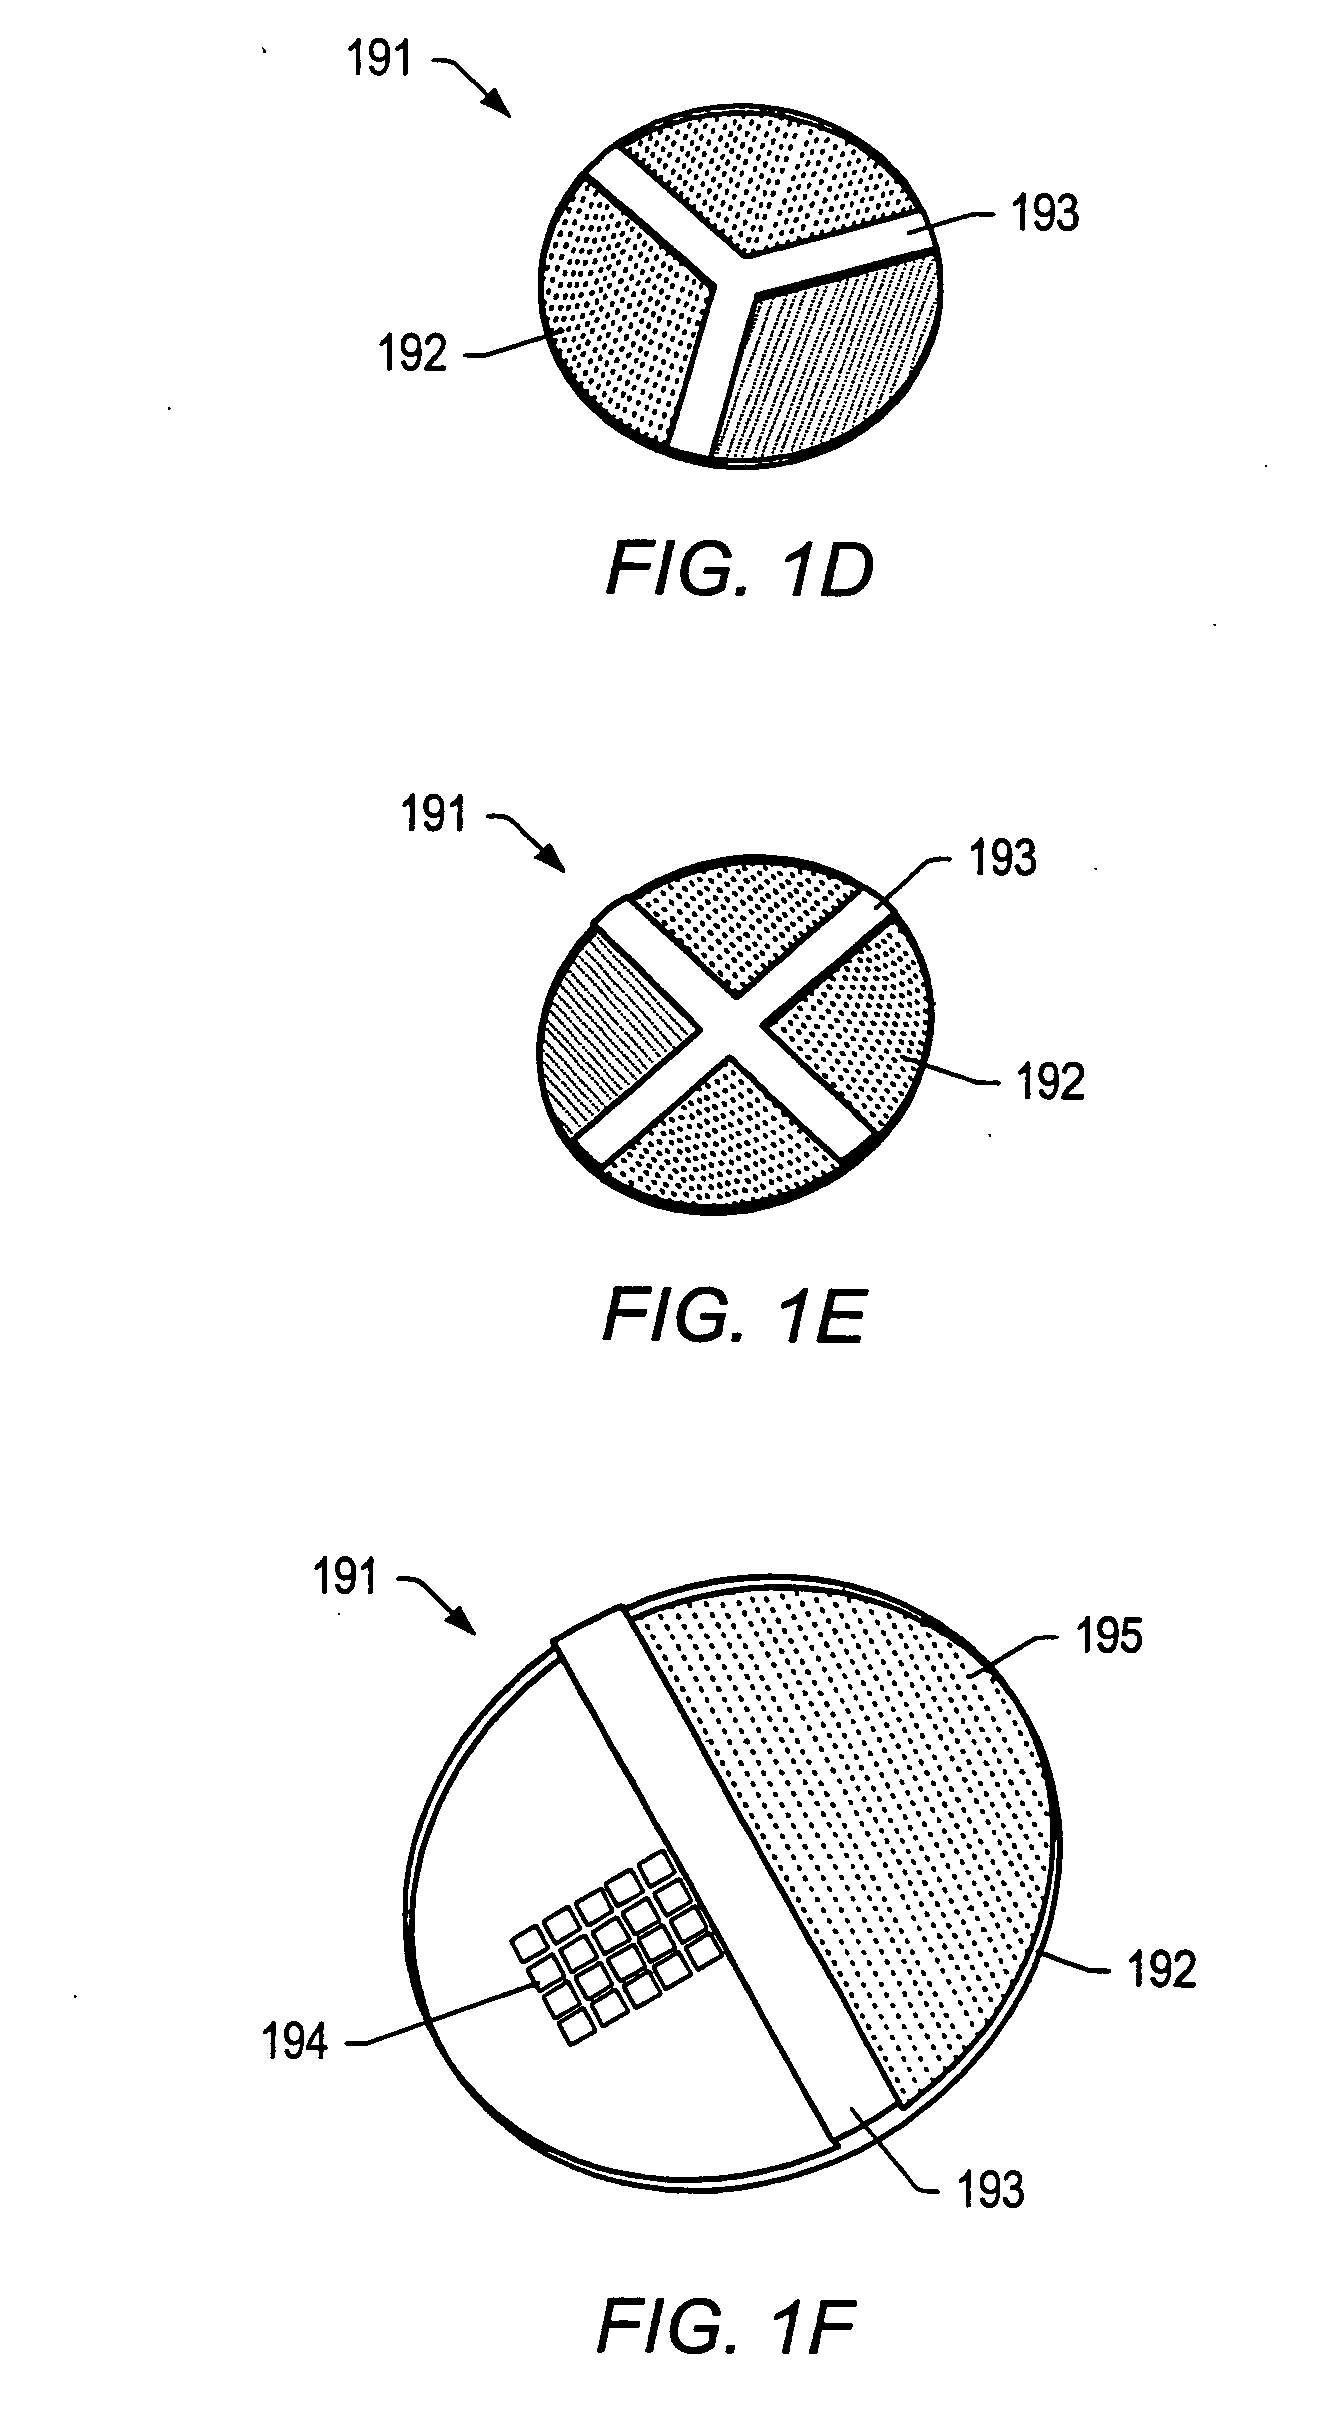 Integration of fluids and reagents into self-contained cartridges containing sensor elements